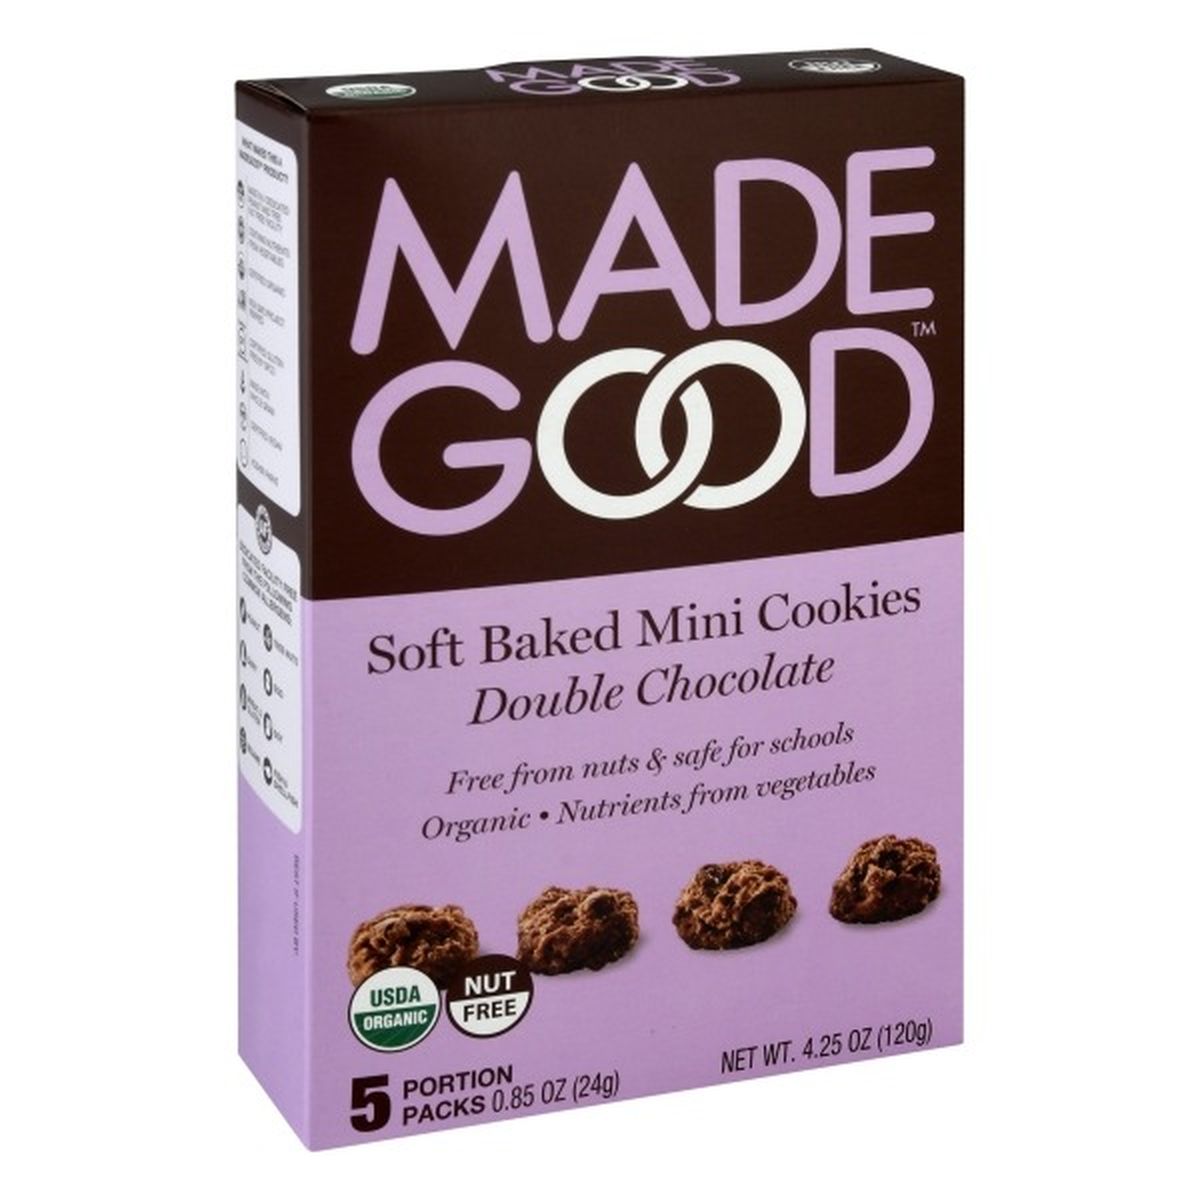 Calories in Made Good Mini Cookies, Double Chocolate, Soft Baked